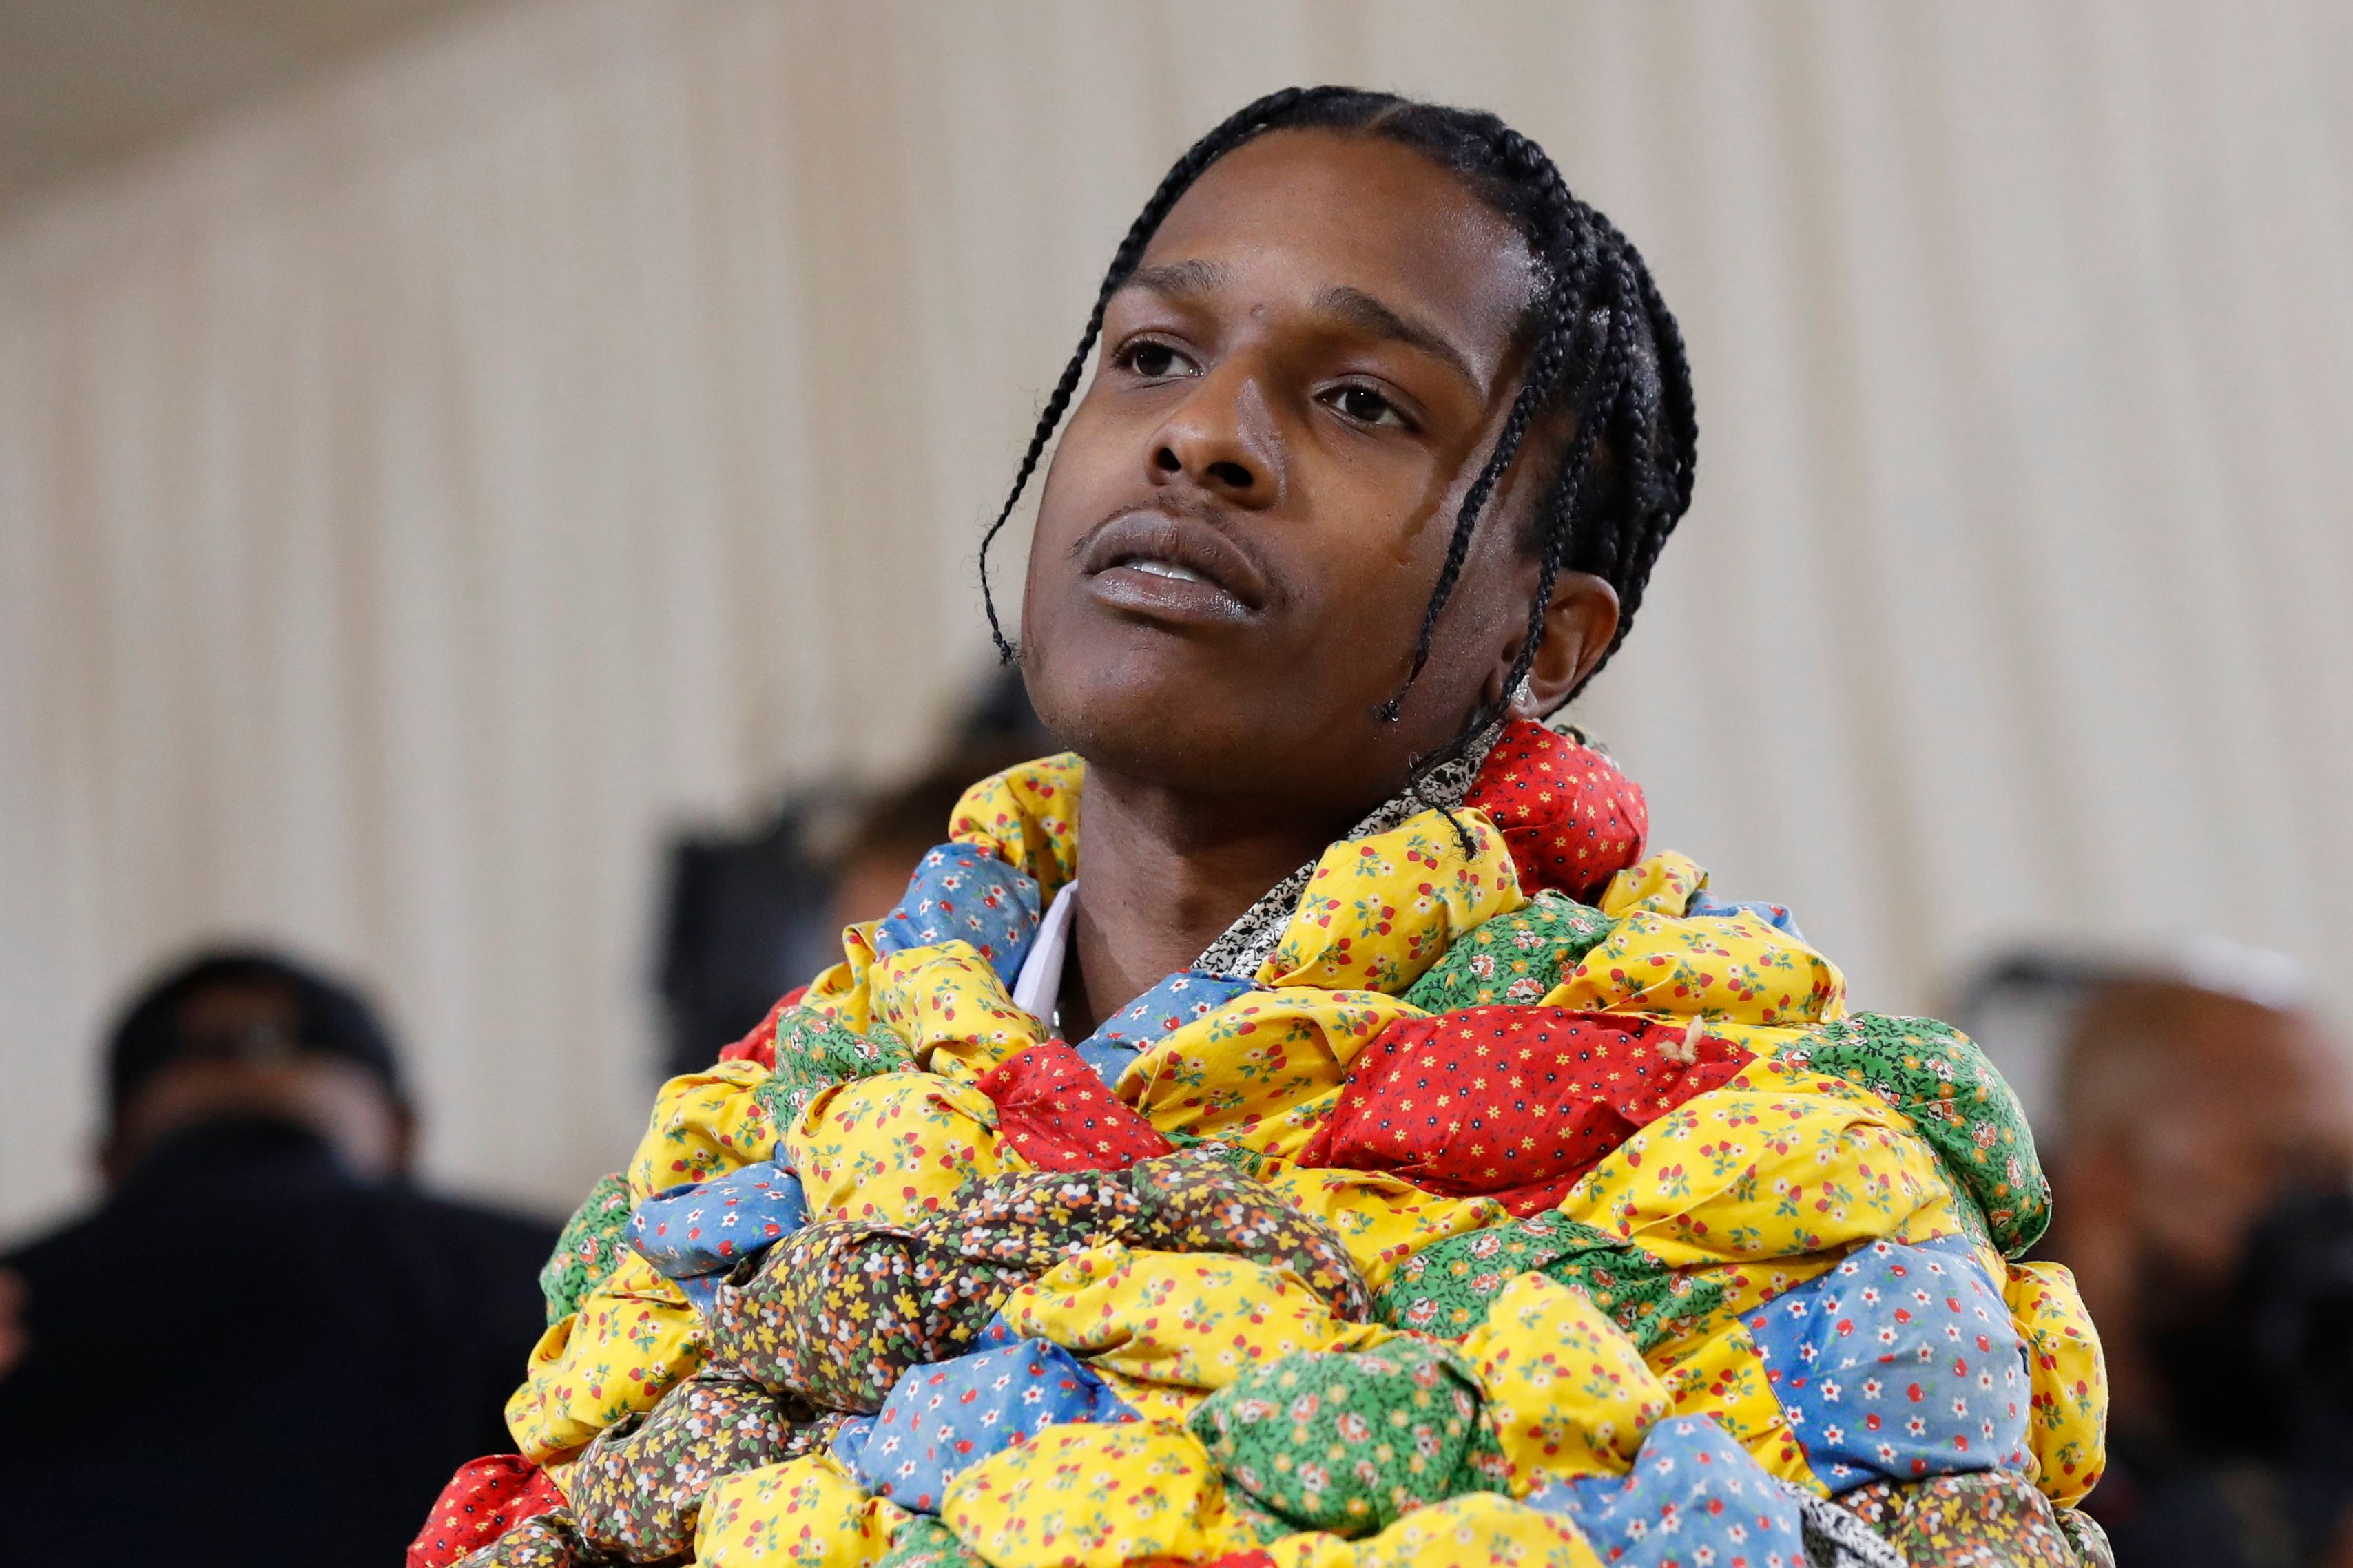 Metropolitan Museum of Art Costume Institute Gala - Met Gala - In America: A Lexicon of Fashion - Arrivals - New York City, U.S. - September 13, 2021. ASAP Rocky. REUTERS/Mario Anzuoni